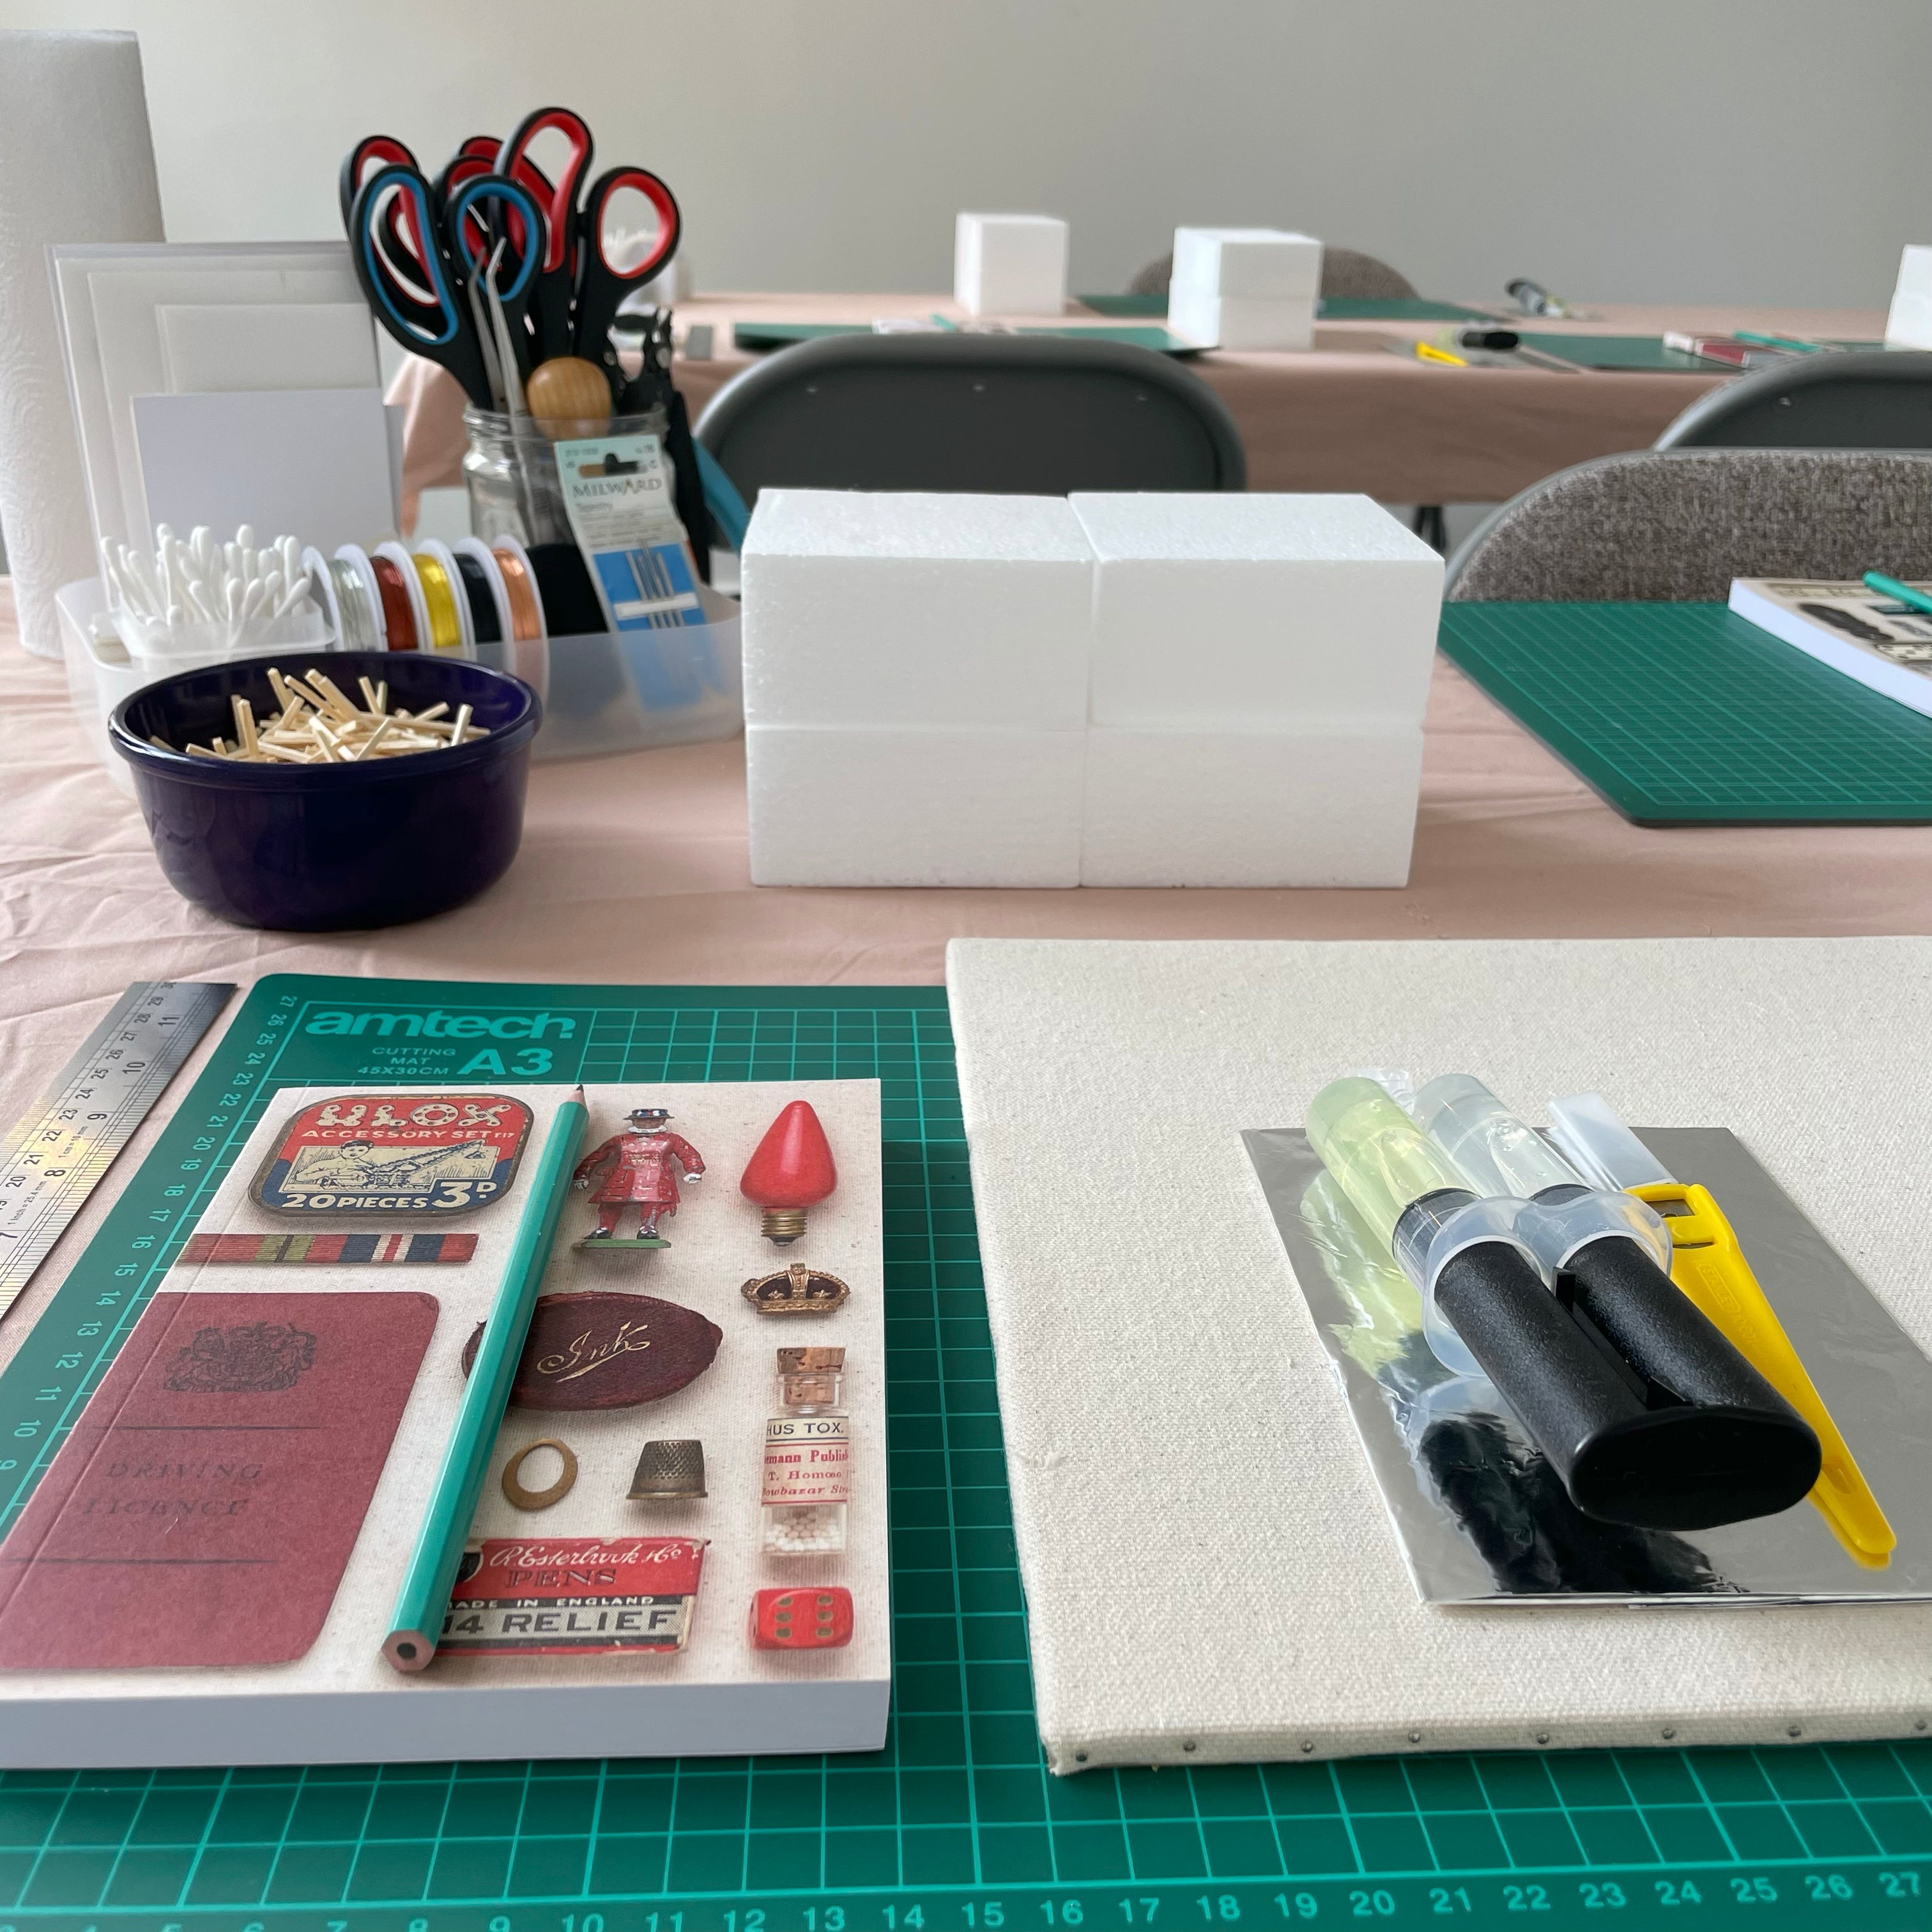 Personal Memory Box Day Workshop